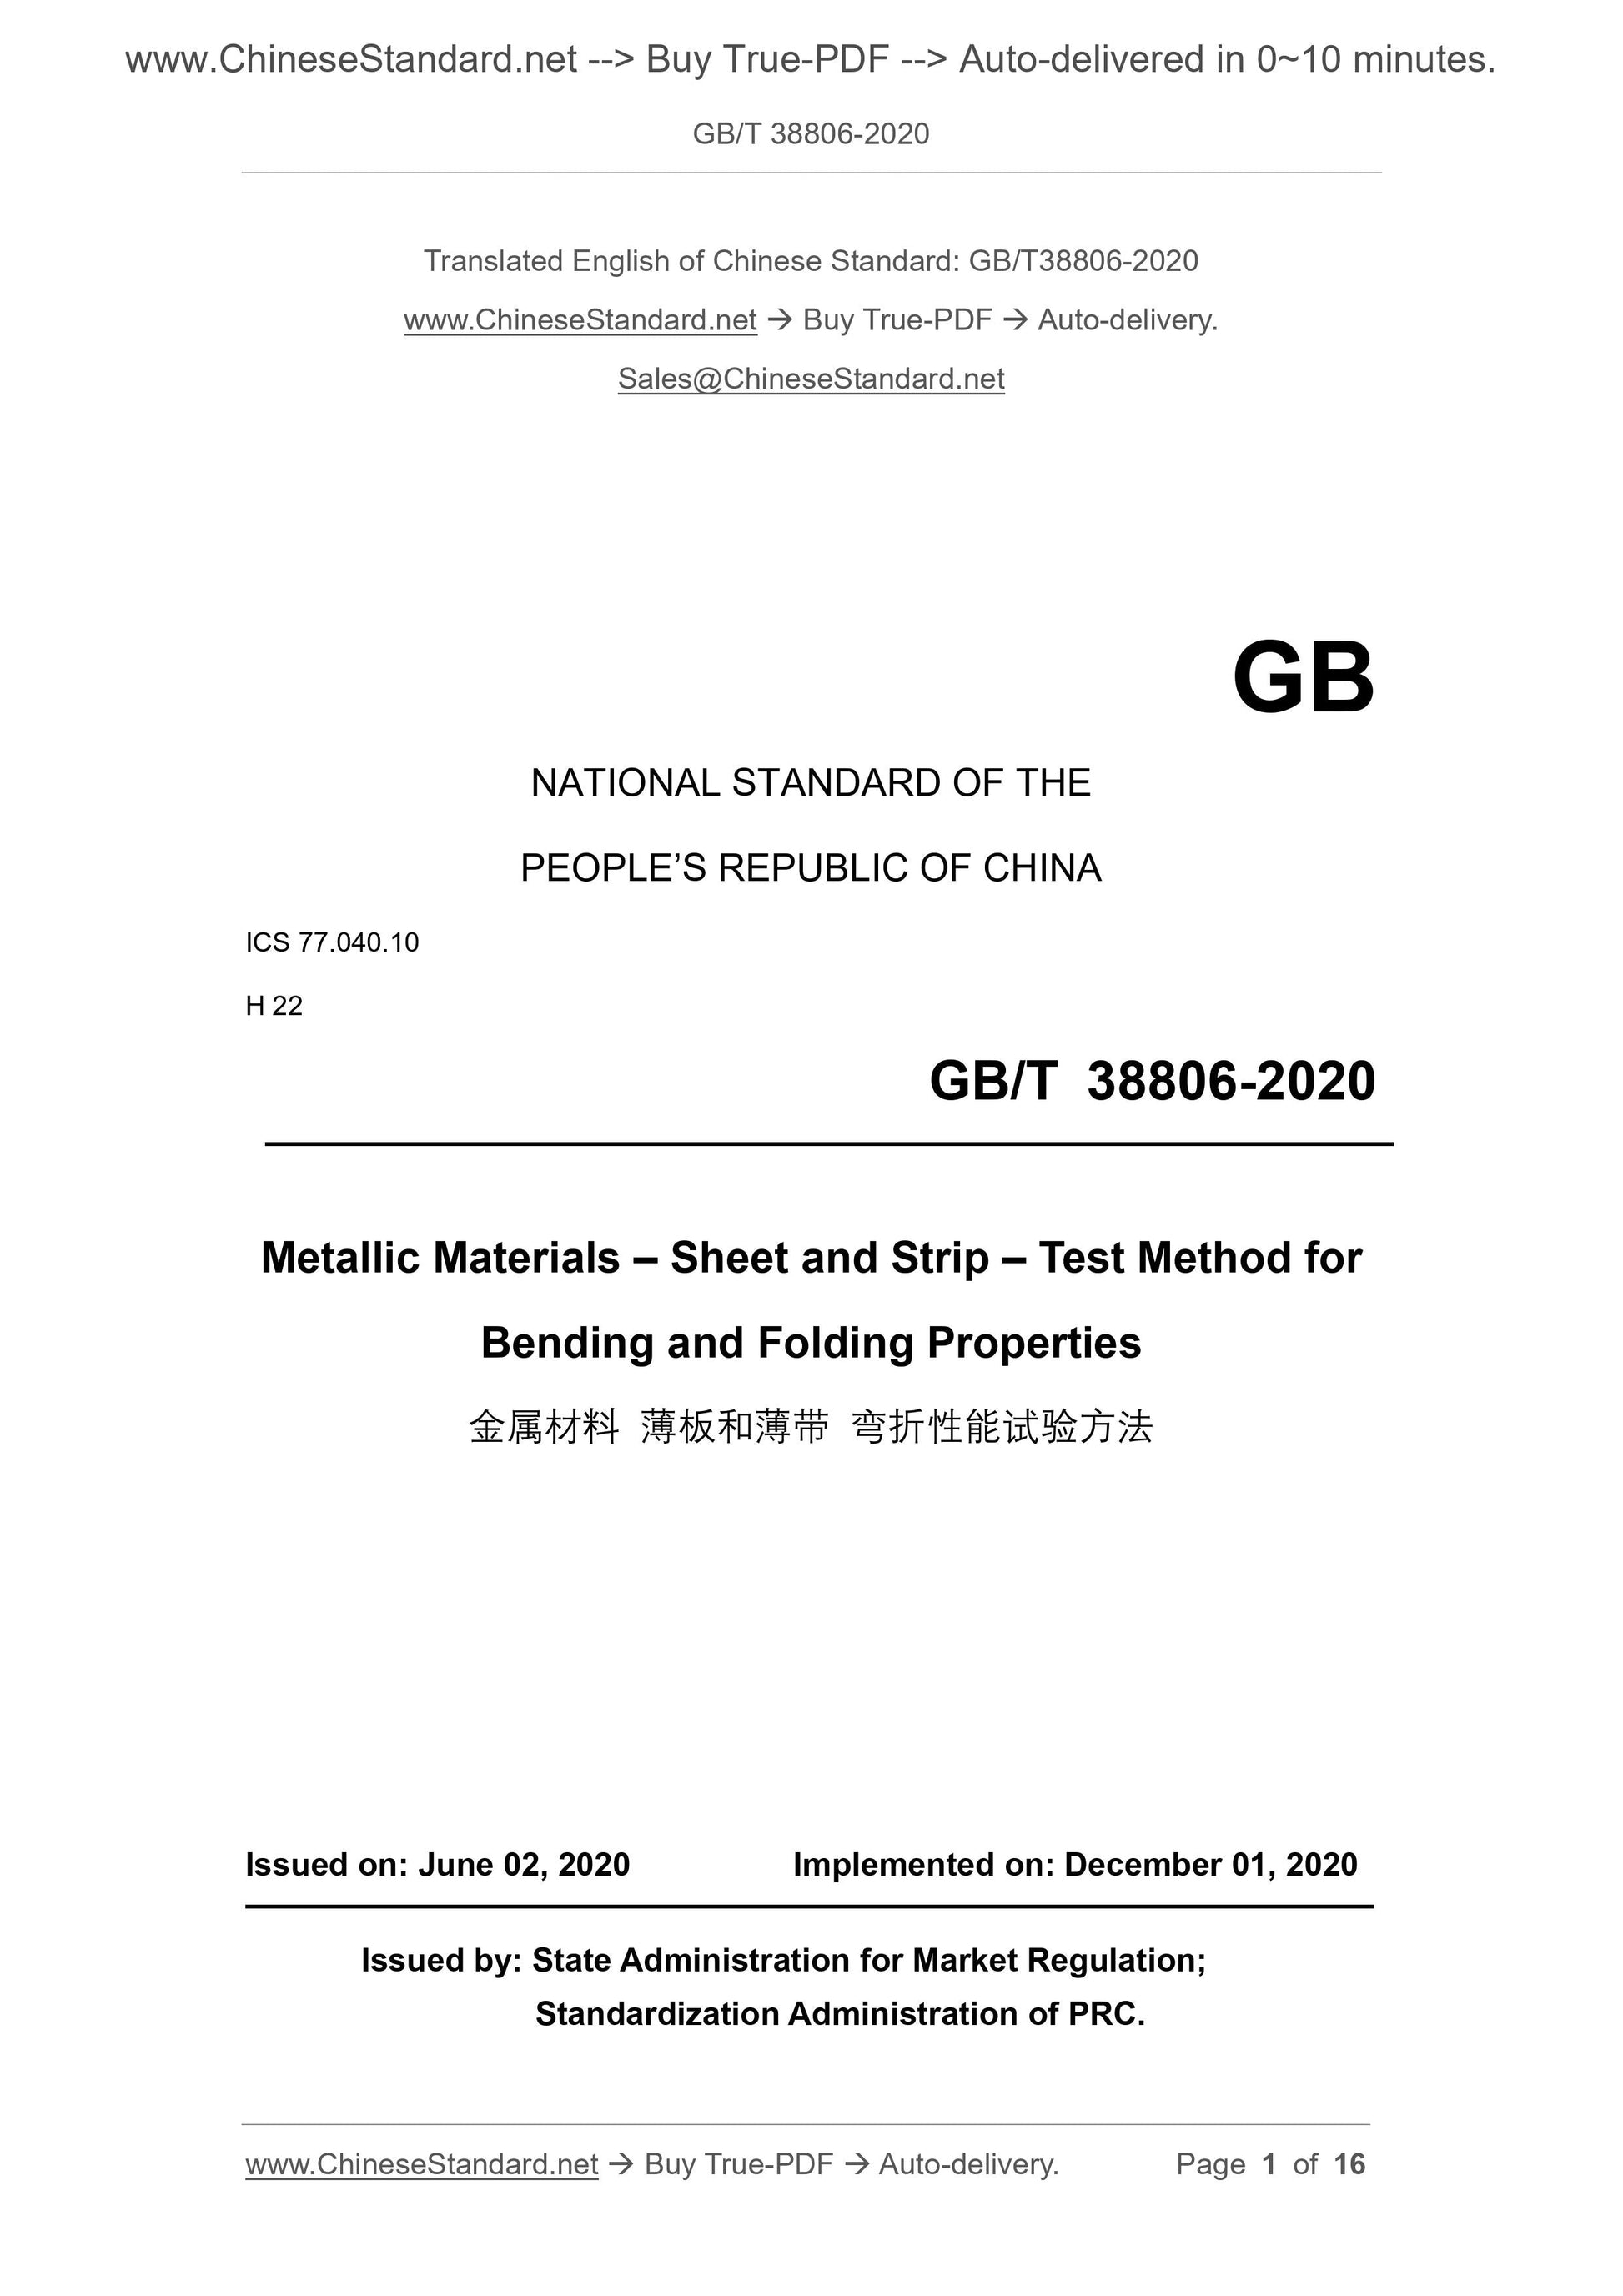 GB/T 38806-2020 Page 1